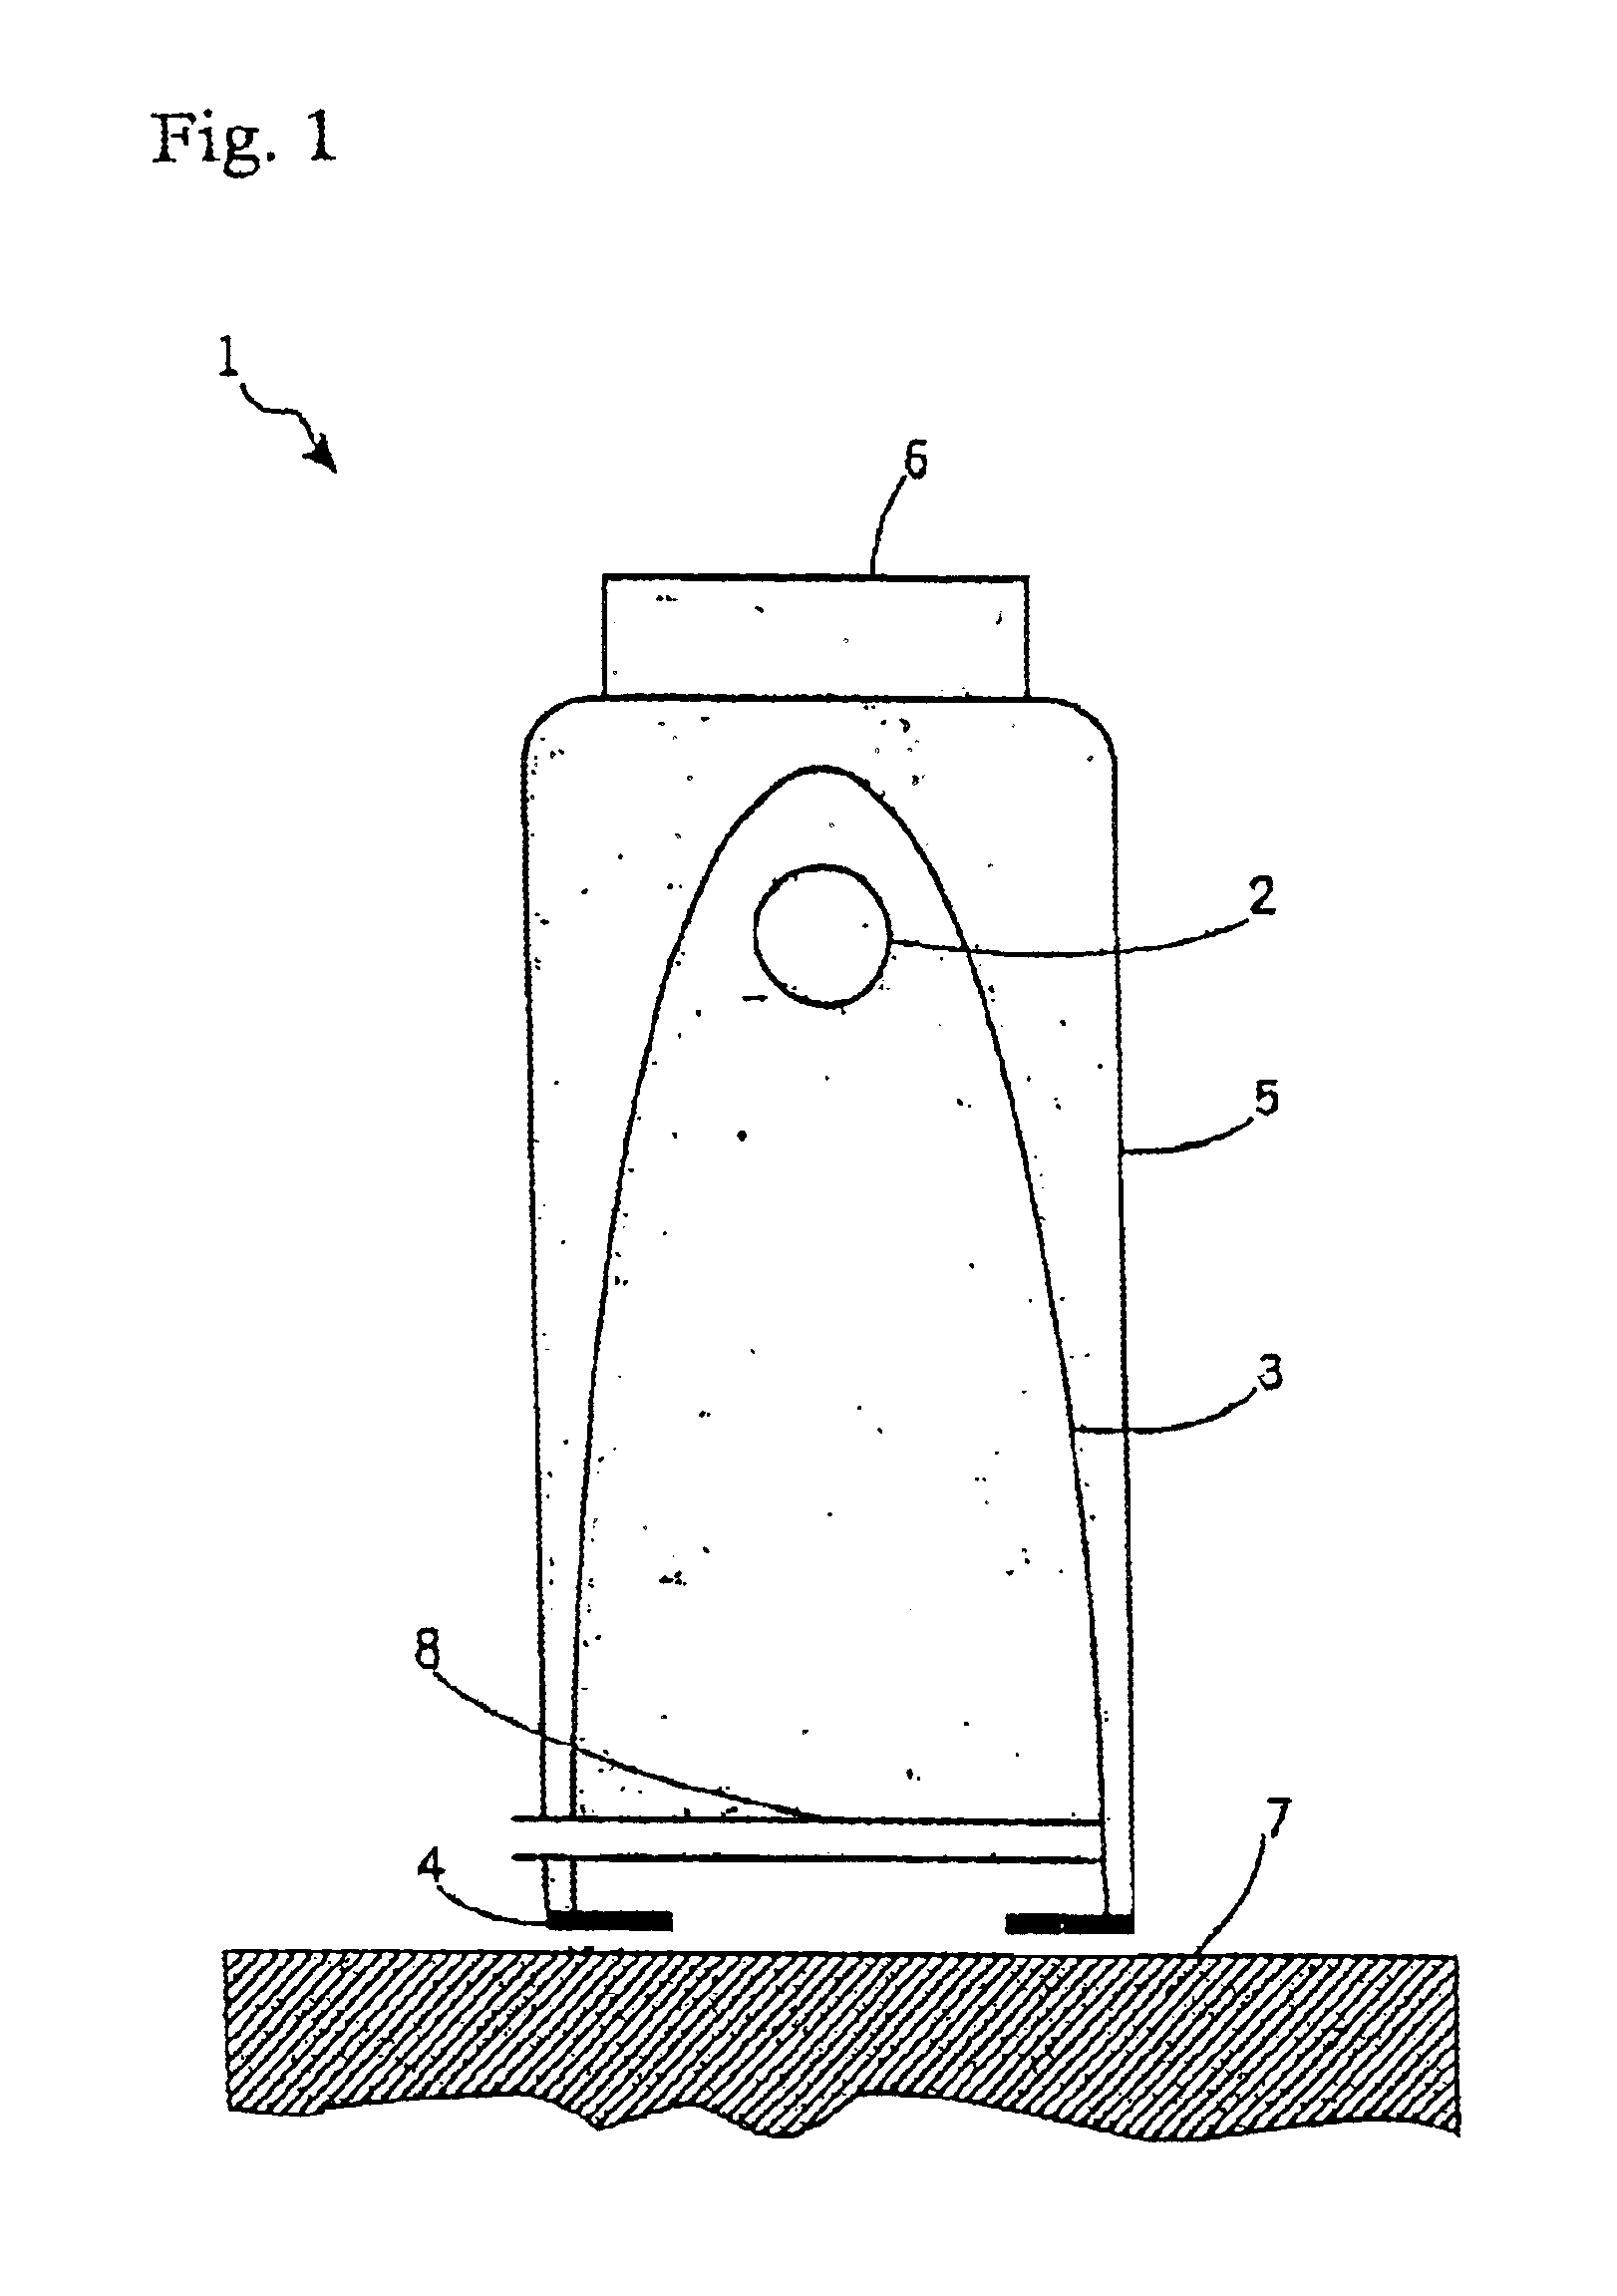 Irradiation device for therapeutic treatment of skin and other ailments